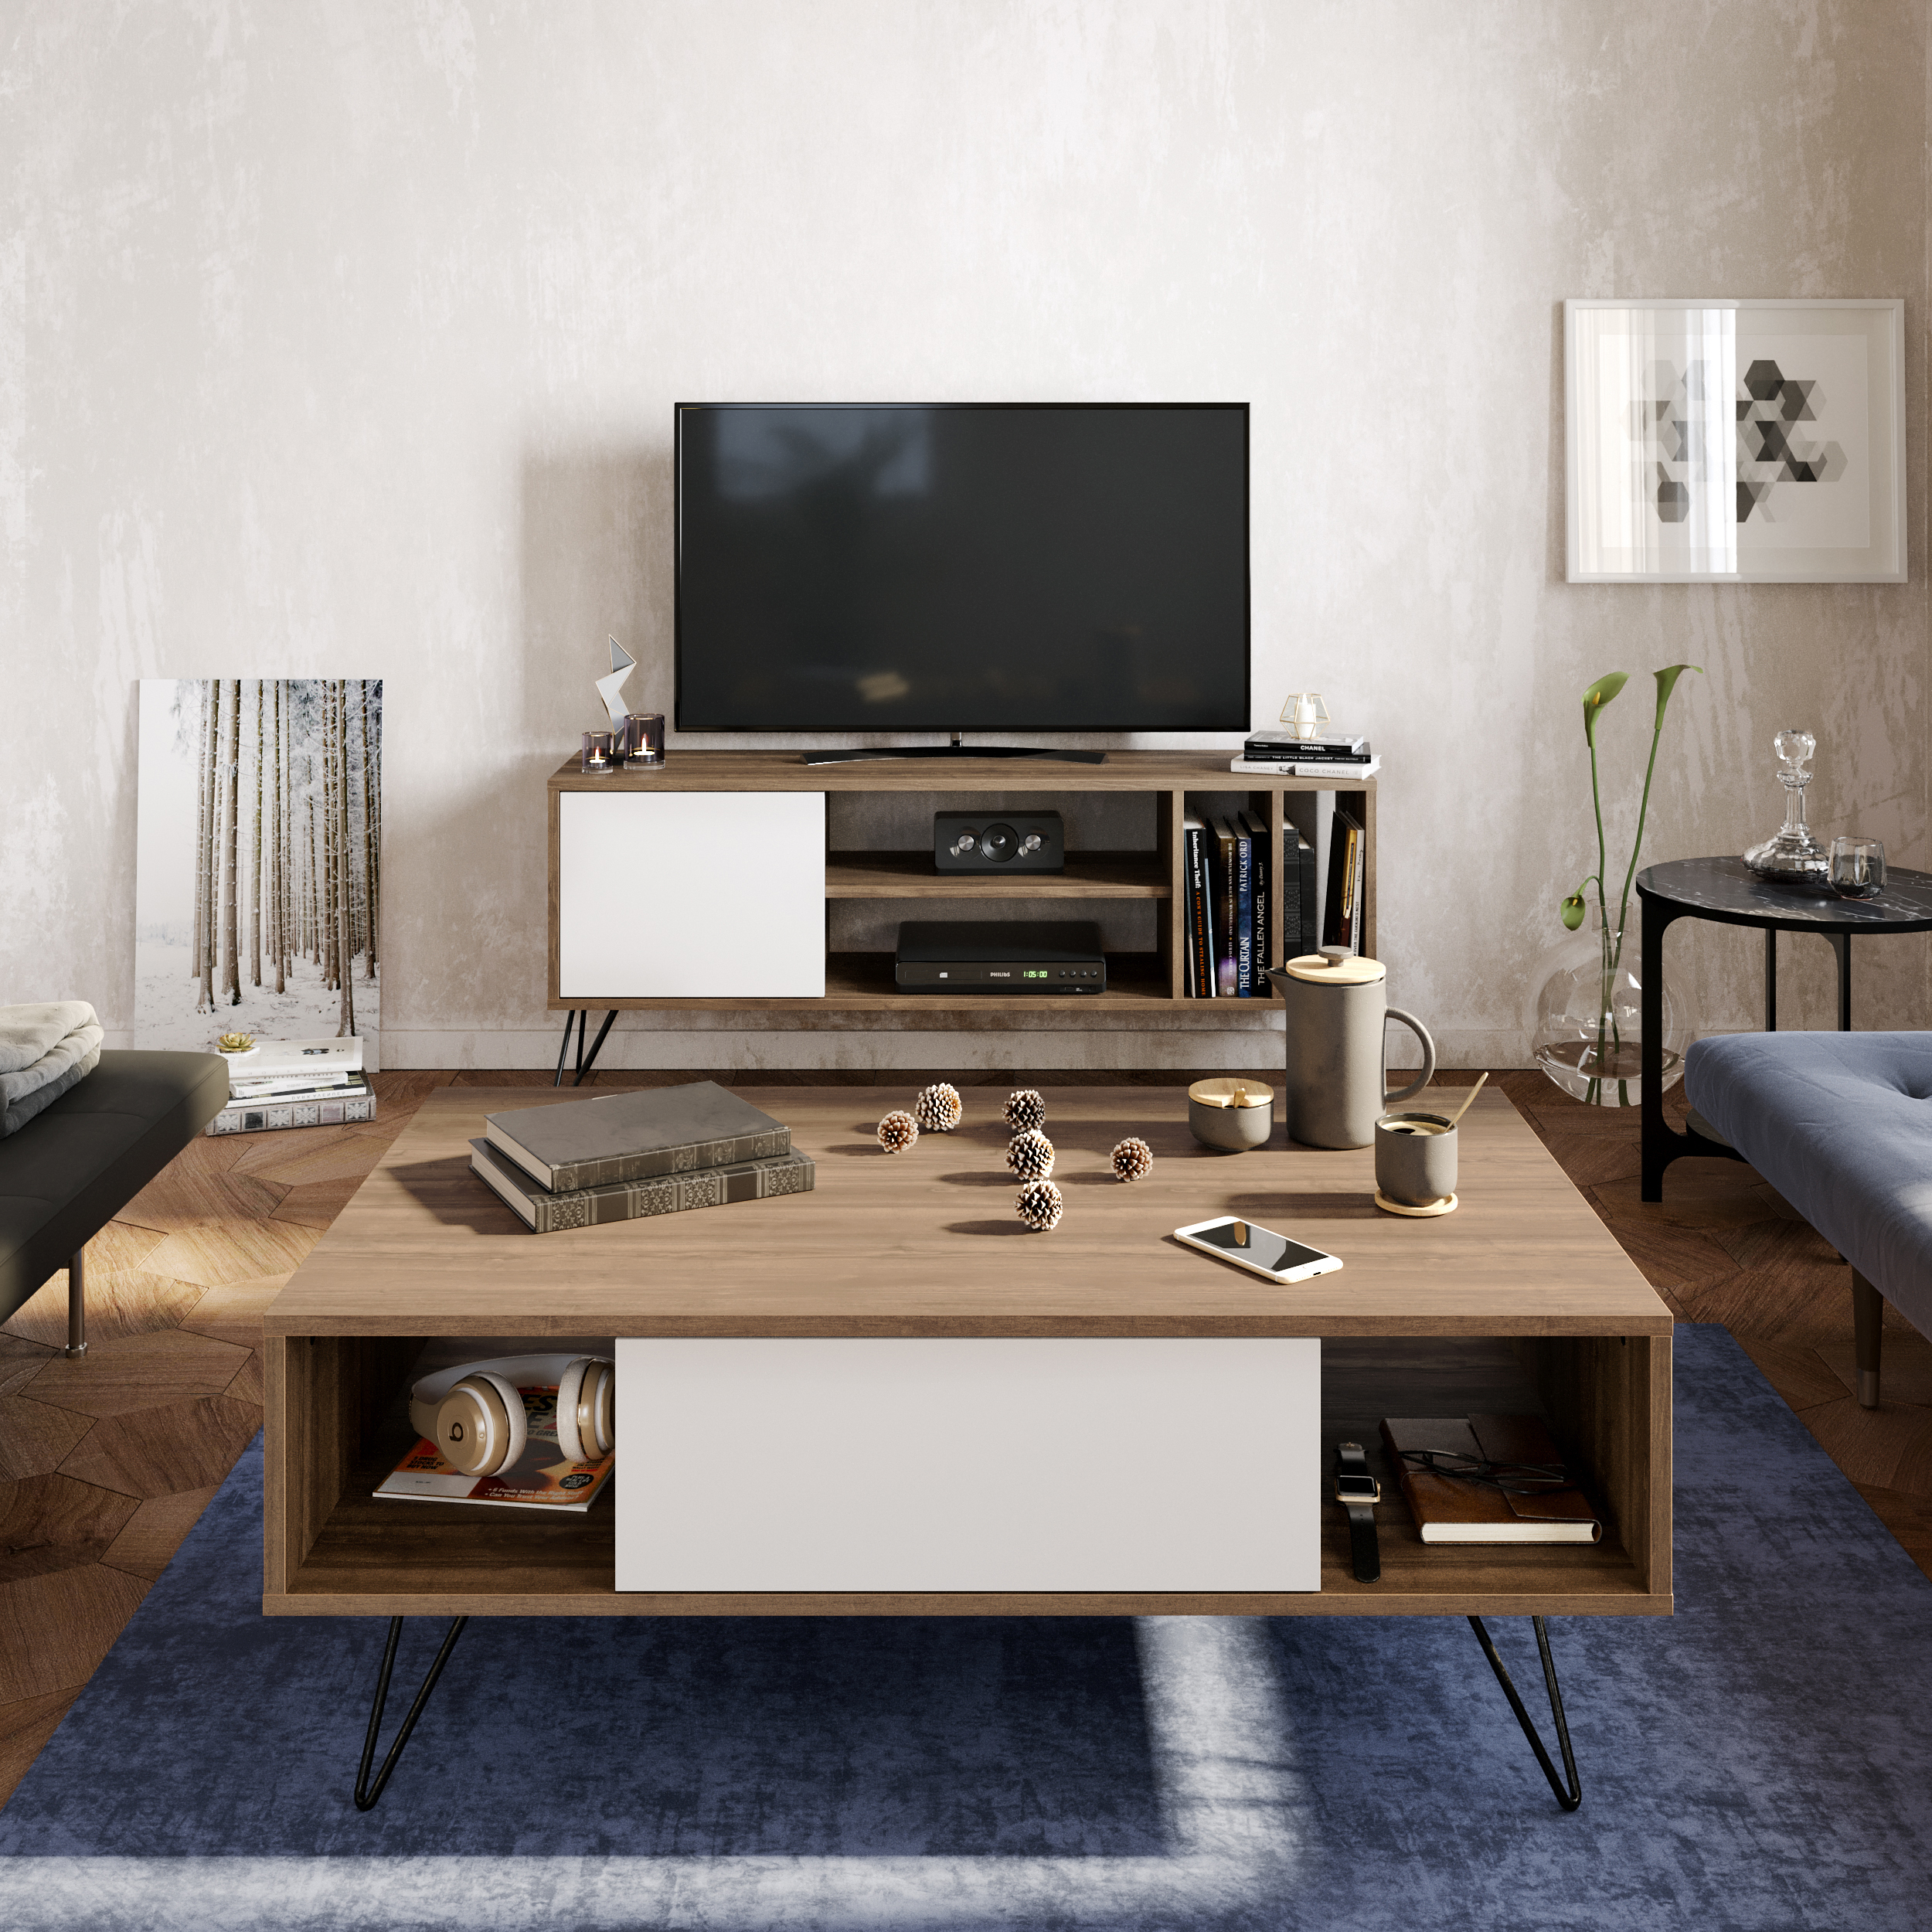 Mistico collection, TV stand, coffee table, bookcase, media console, bookshelf, TV cabinet, media stand